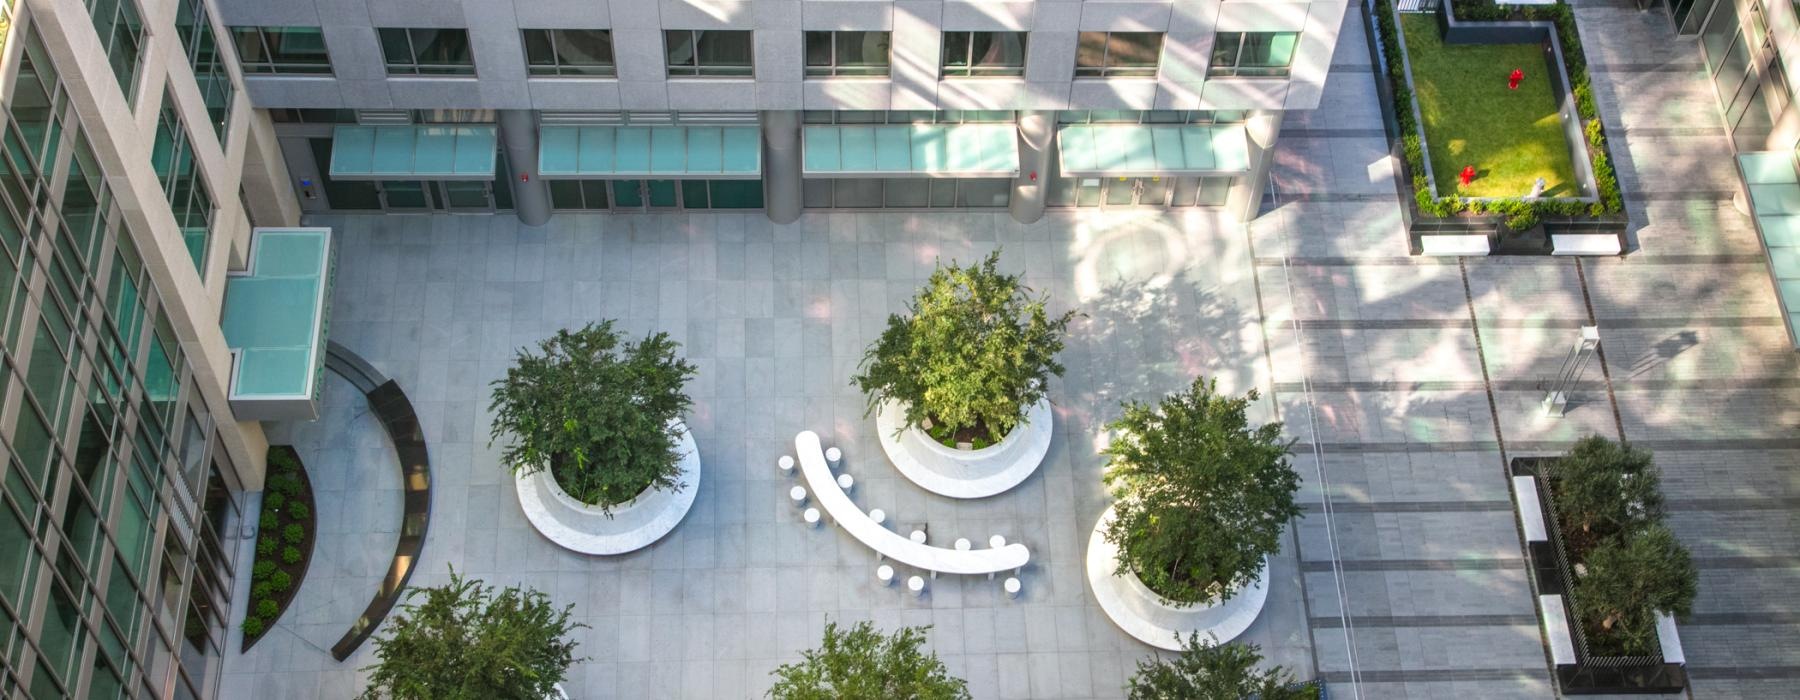 aerial of outside courtyard with lush landscaping